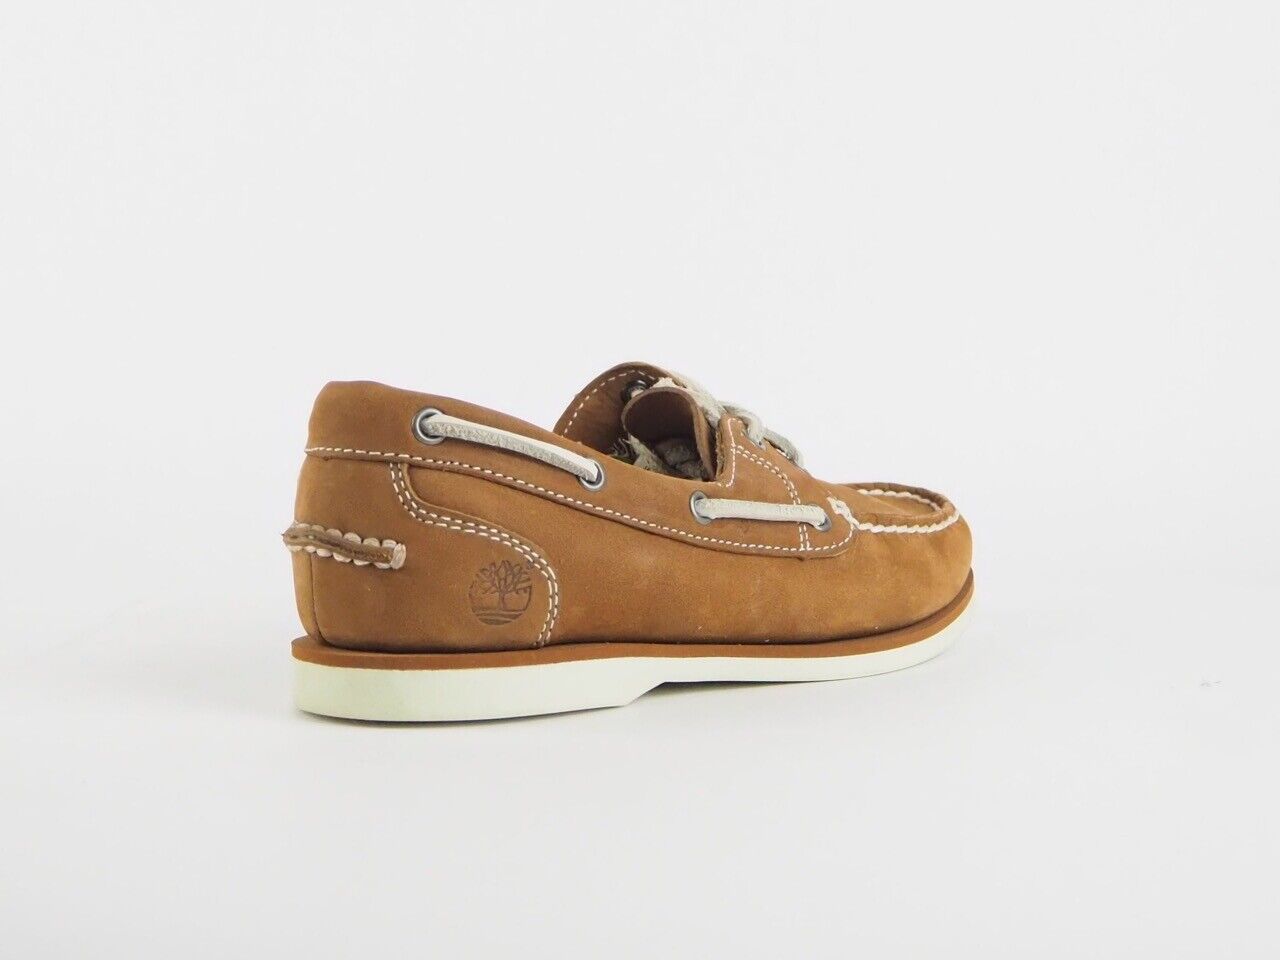 Womens Timberland Classic 2 Eye Boat 8247R Brown Leather Lace Up Boat Shoes - London Top Style